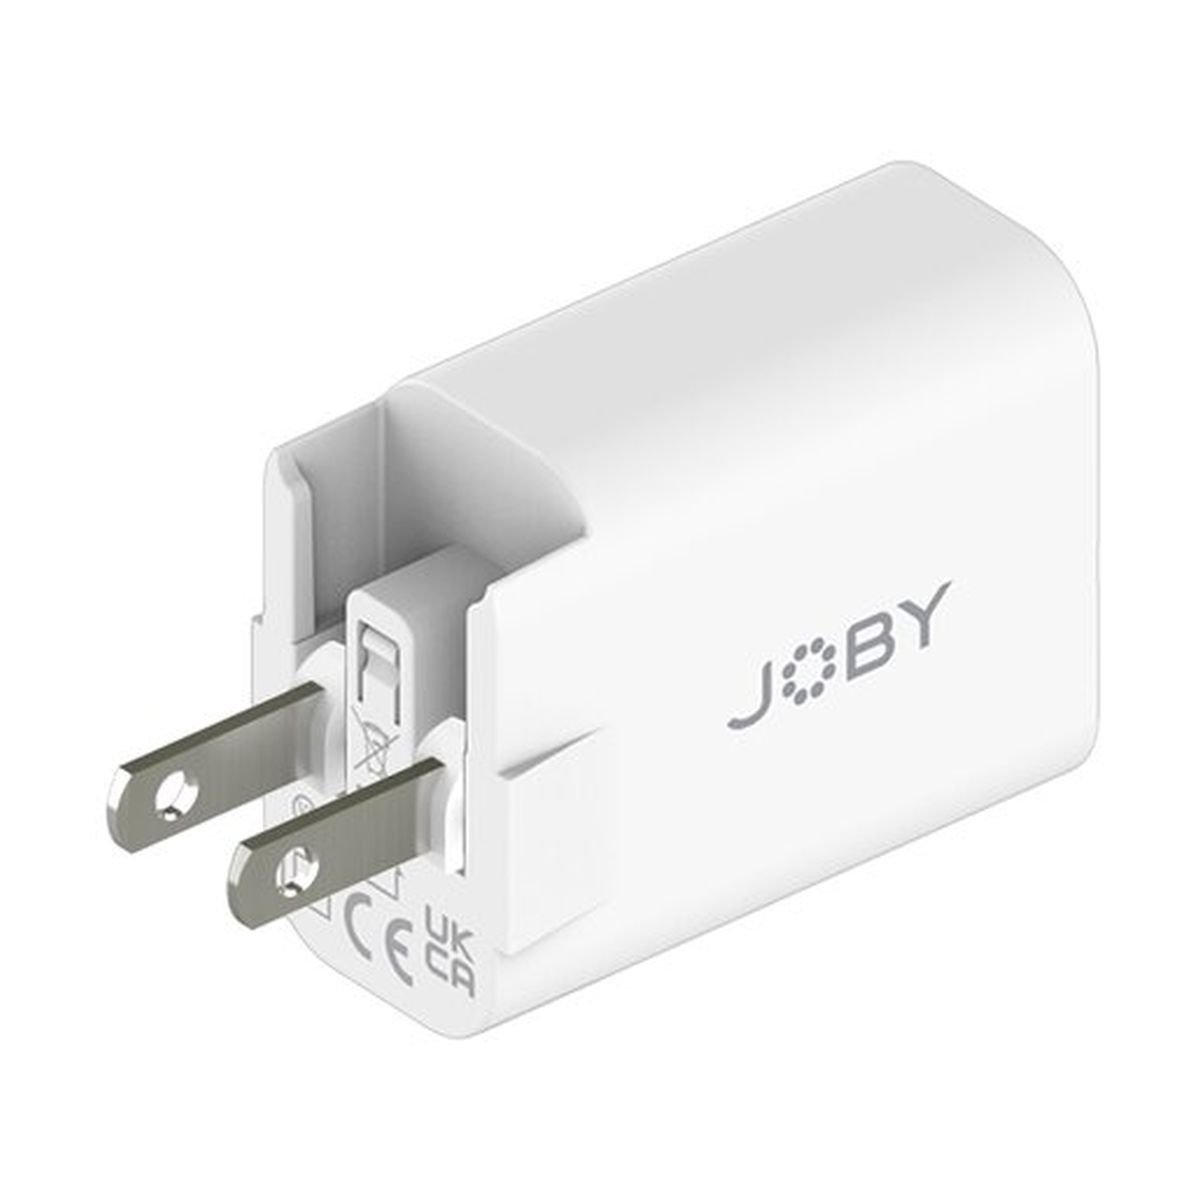 Joby Wall Charger USB-C PD 20W für Smartphones